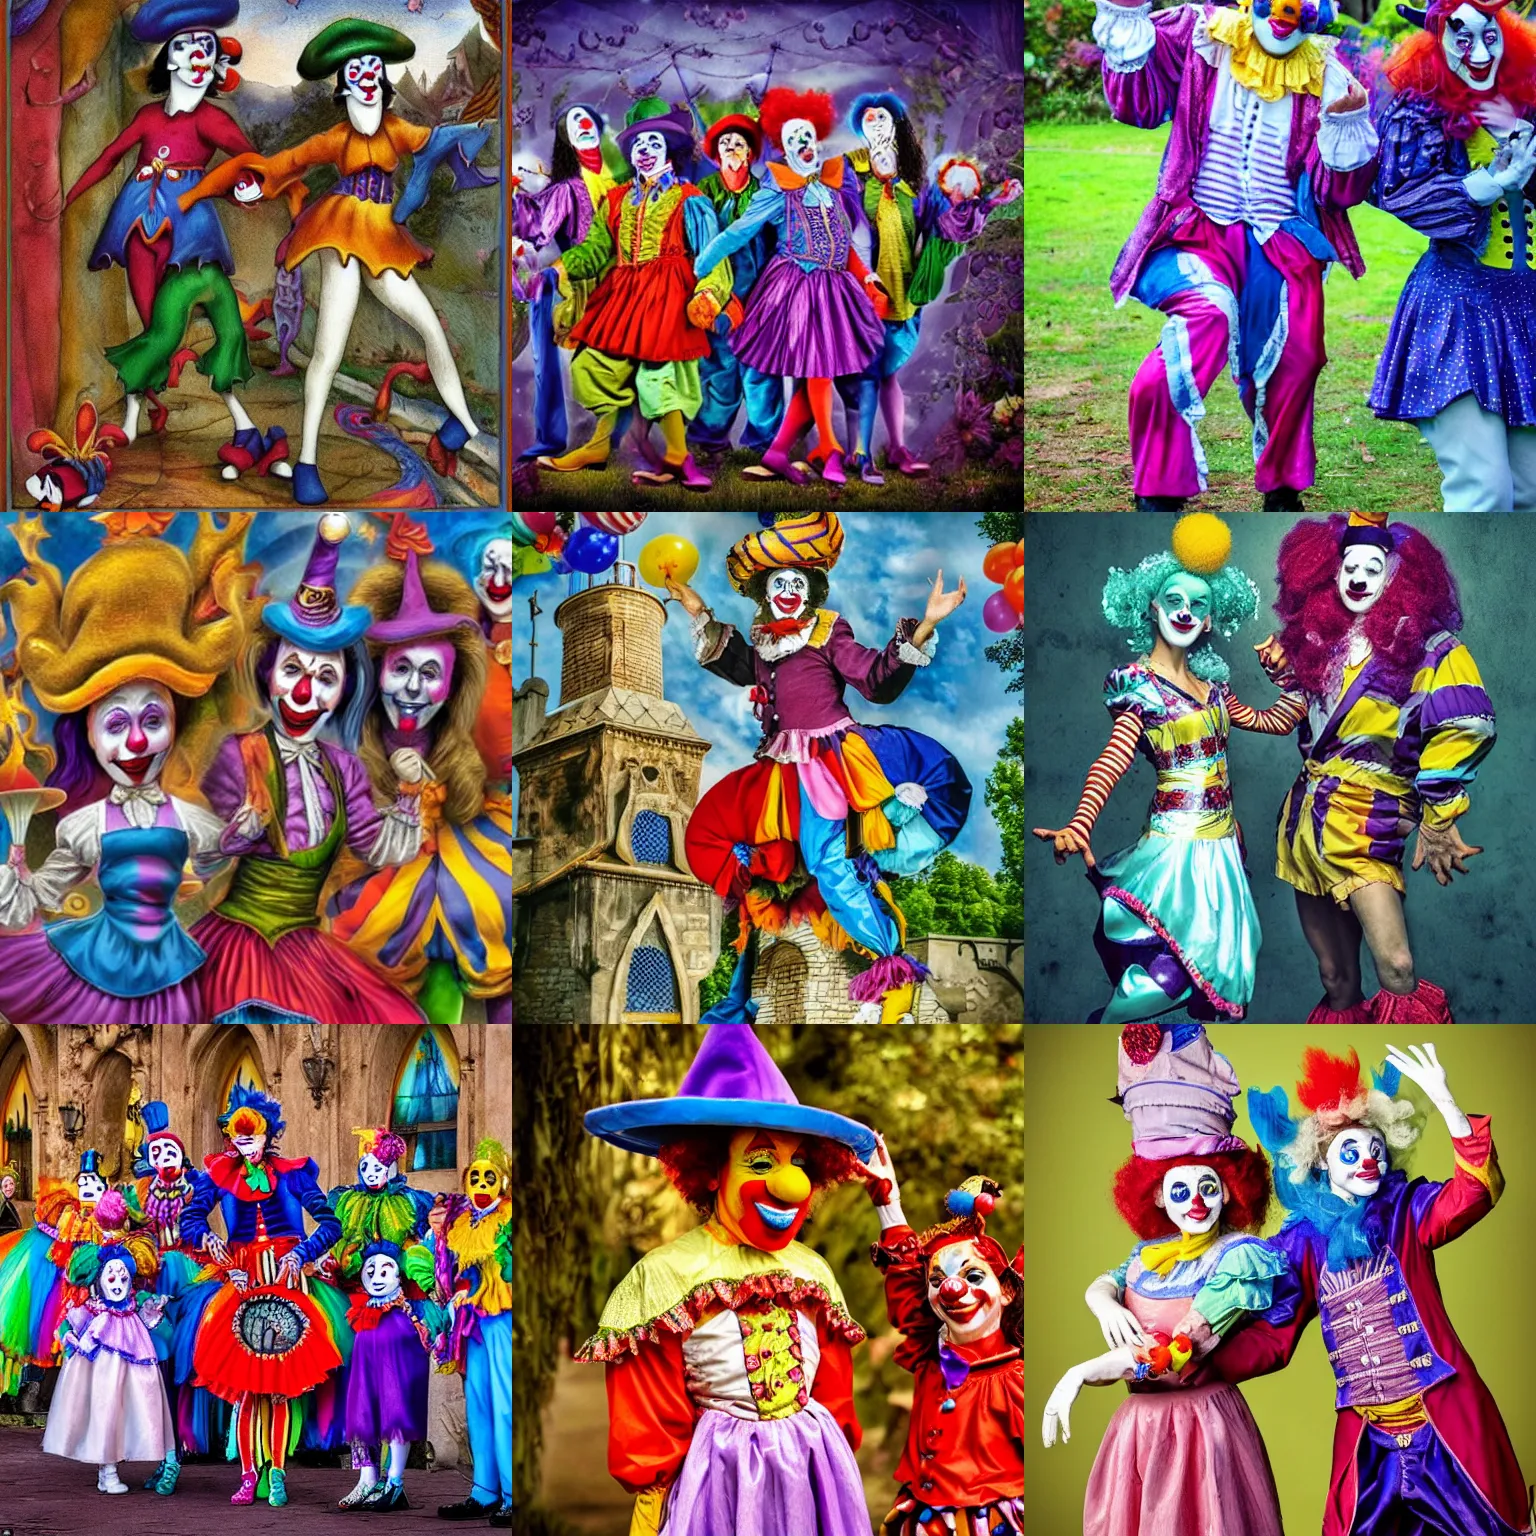 Prompt: Magical beings with the unmistakable appearance and character of clowns or jester